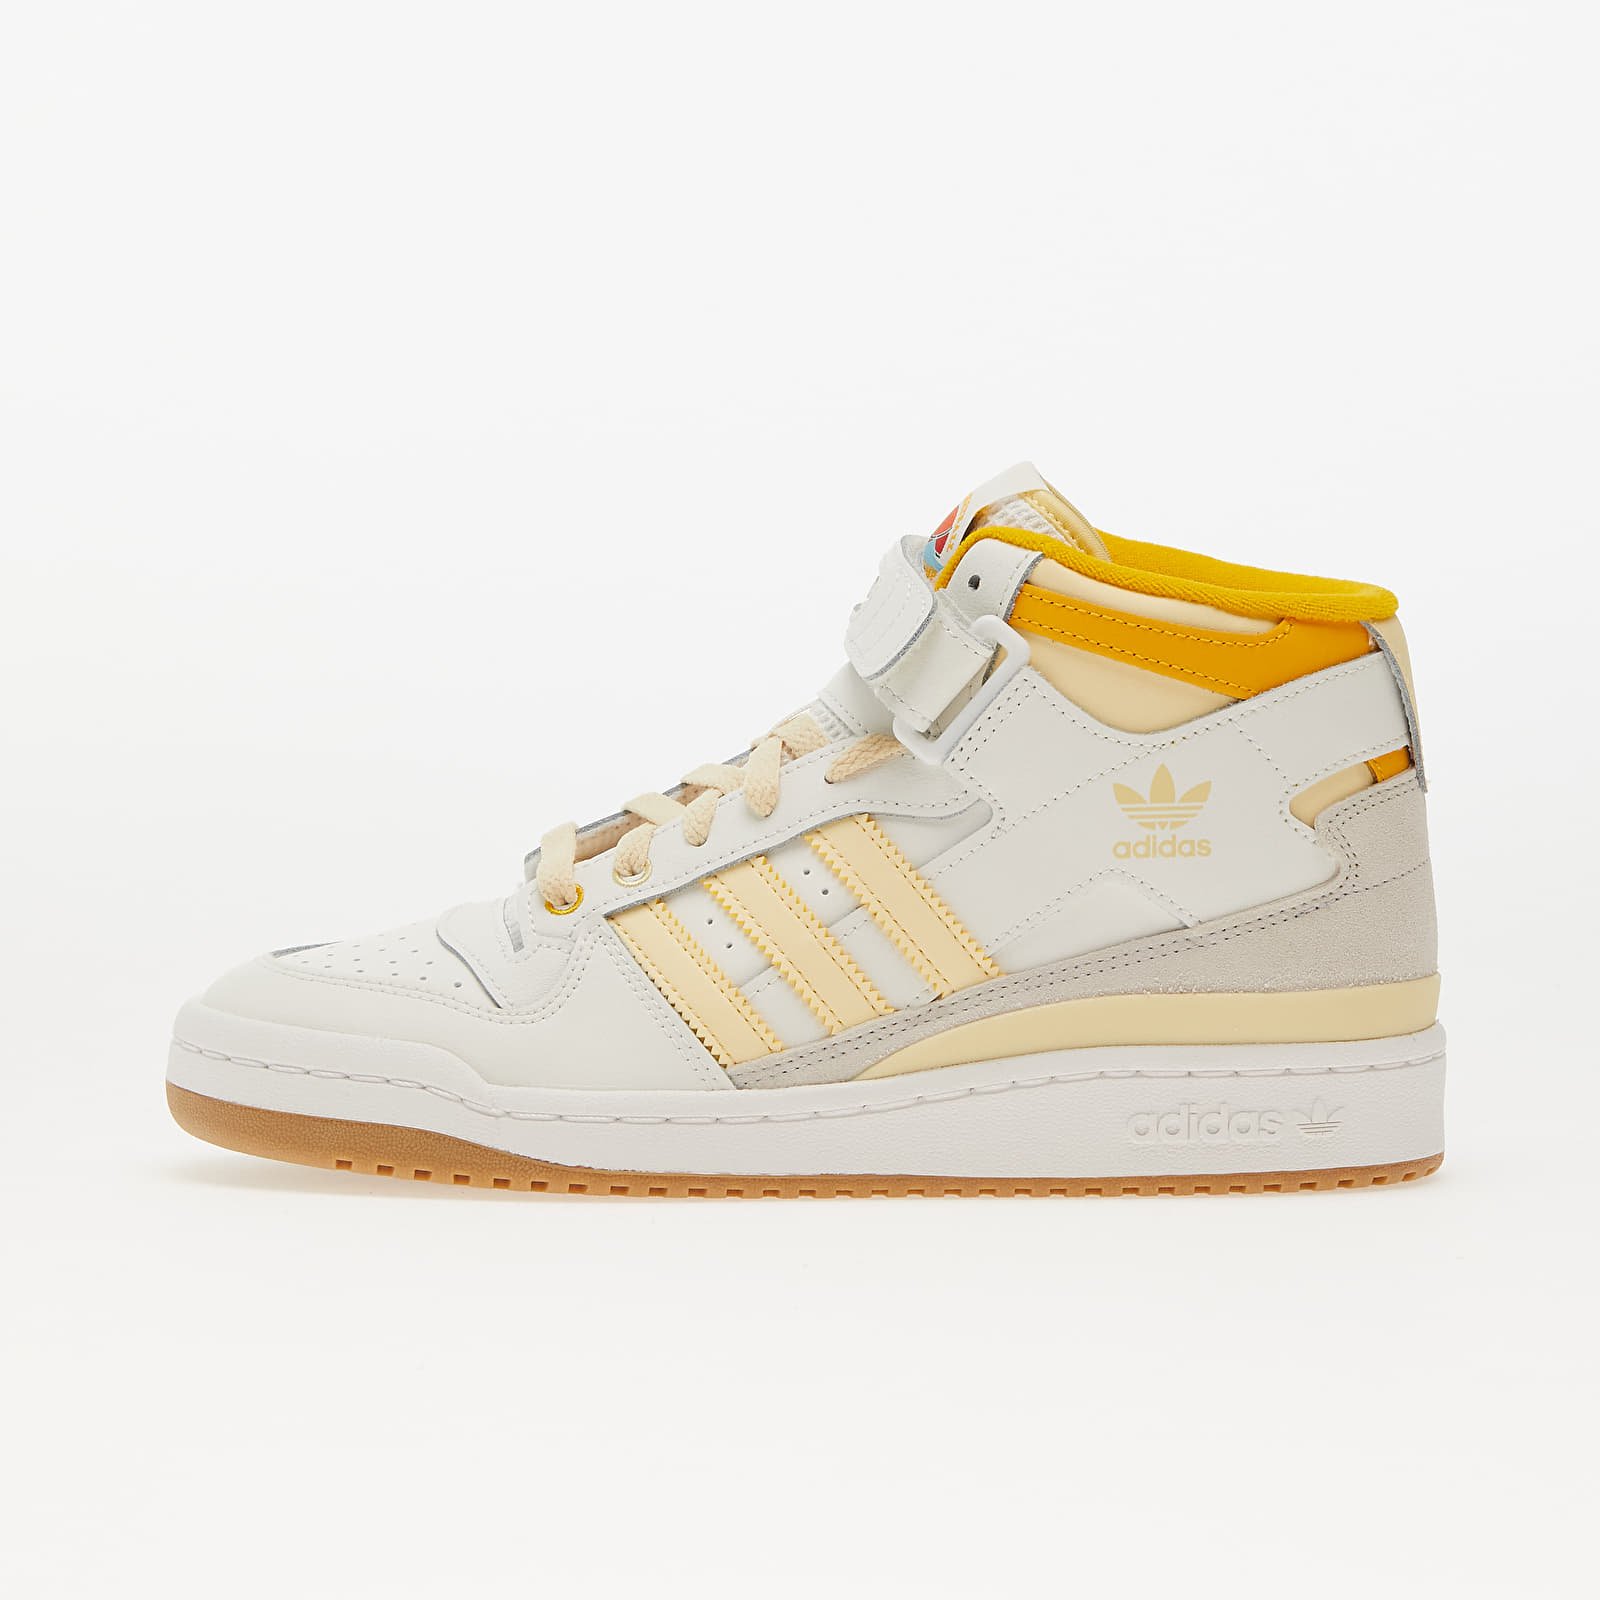 Chaussures et baskets homme adidas Forum Mid Cloud White/ Easy Yellow/ Creme Yellow